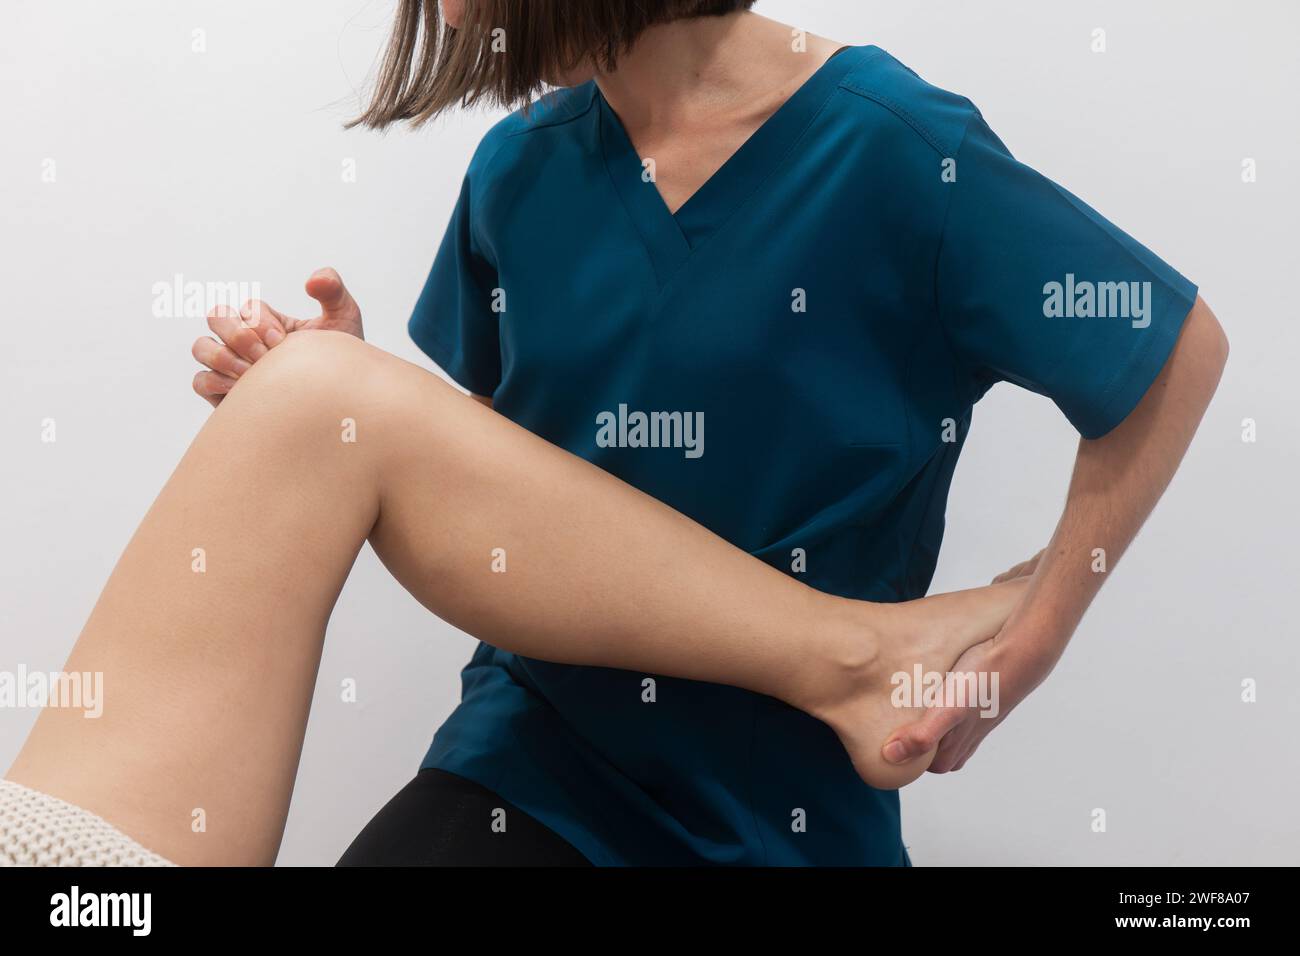 A close-up image of someone in blue medical wear holding their ankle, suggesting pain or injury Stock Photo